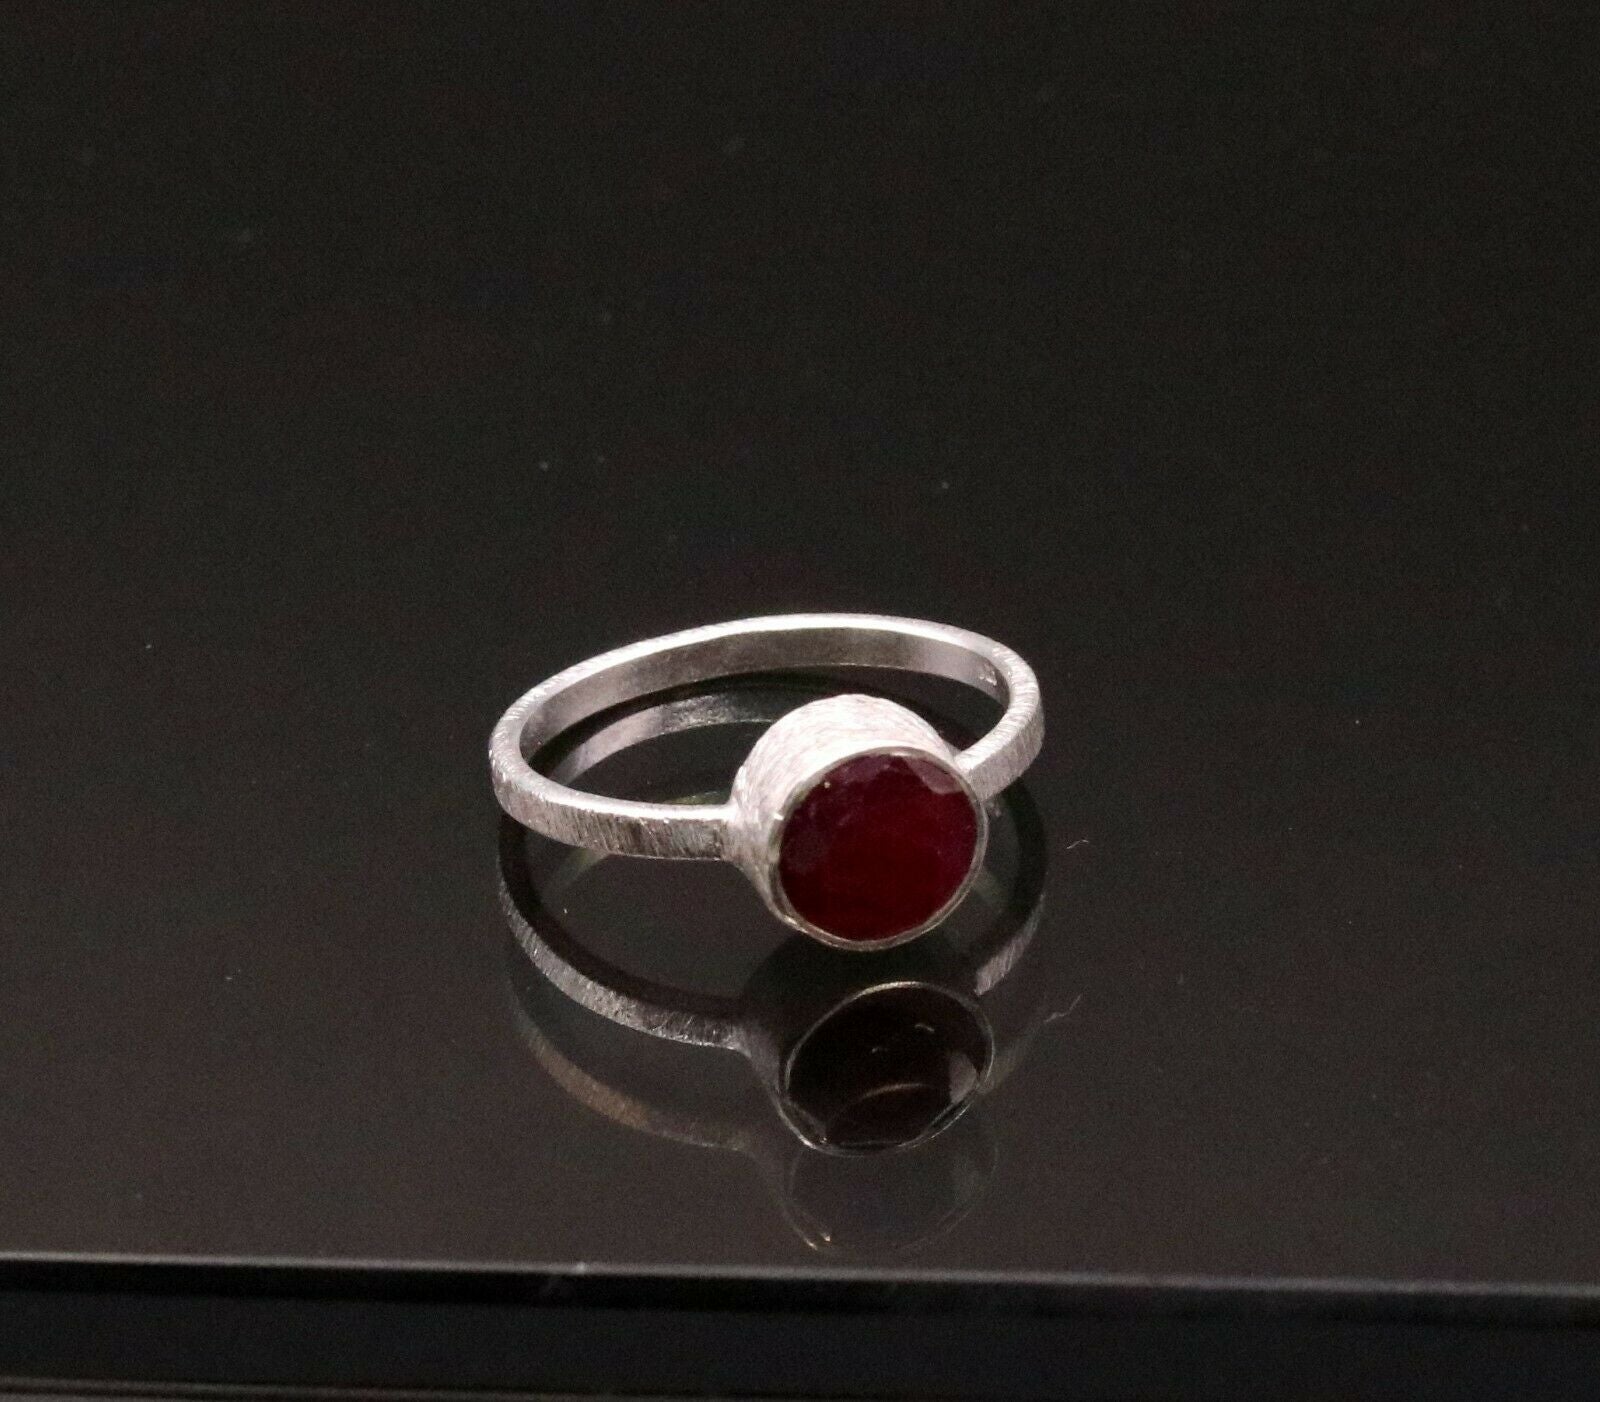 SIMULATED RUBY STONE 925 SILVER RING BAND ENGAGEMENT ANNIVERSARY GIFTING sr149 - TRIBAL ORNAMENTS